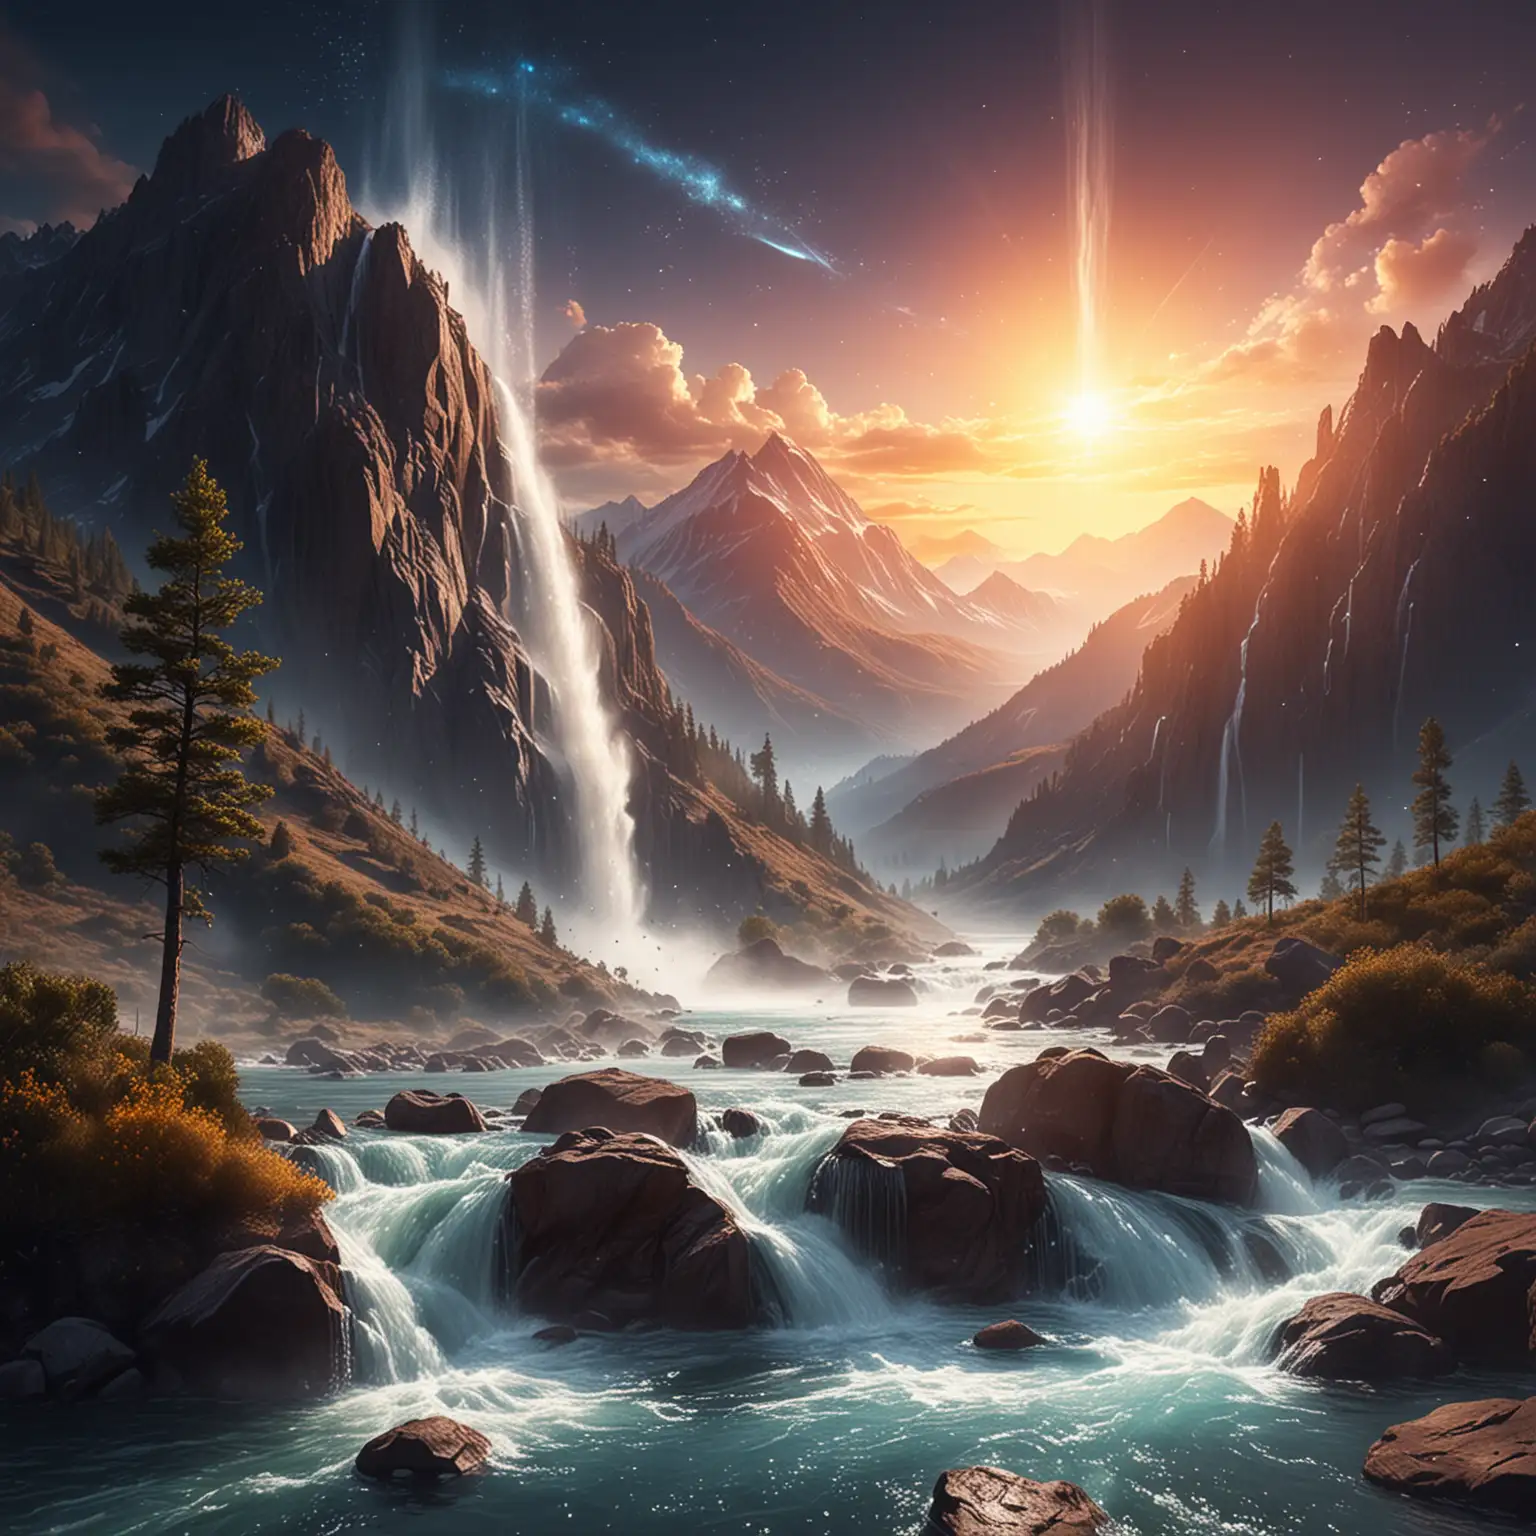 create an image that depicts water streaming down from mountain with outerspace effects. Include a sunrise